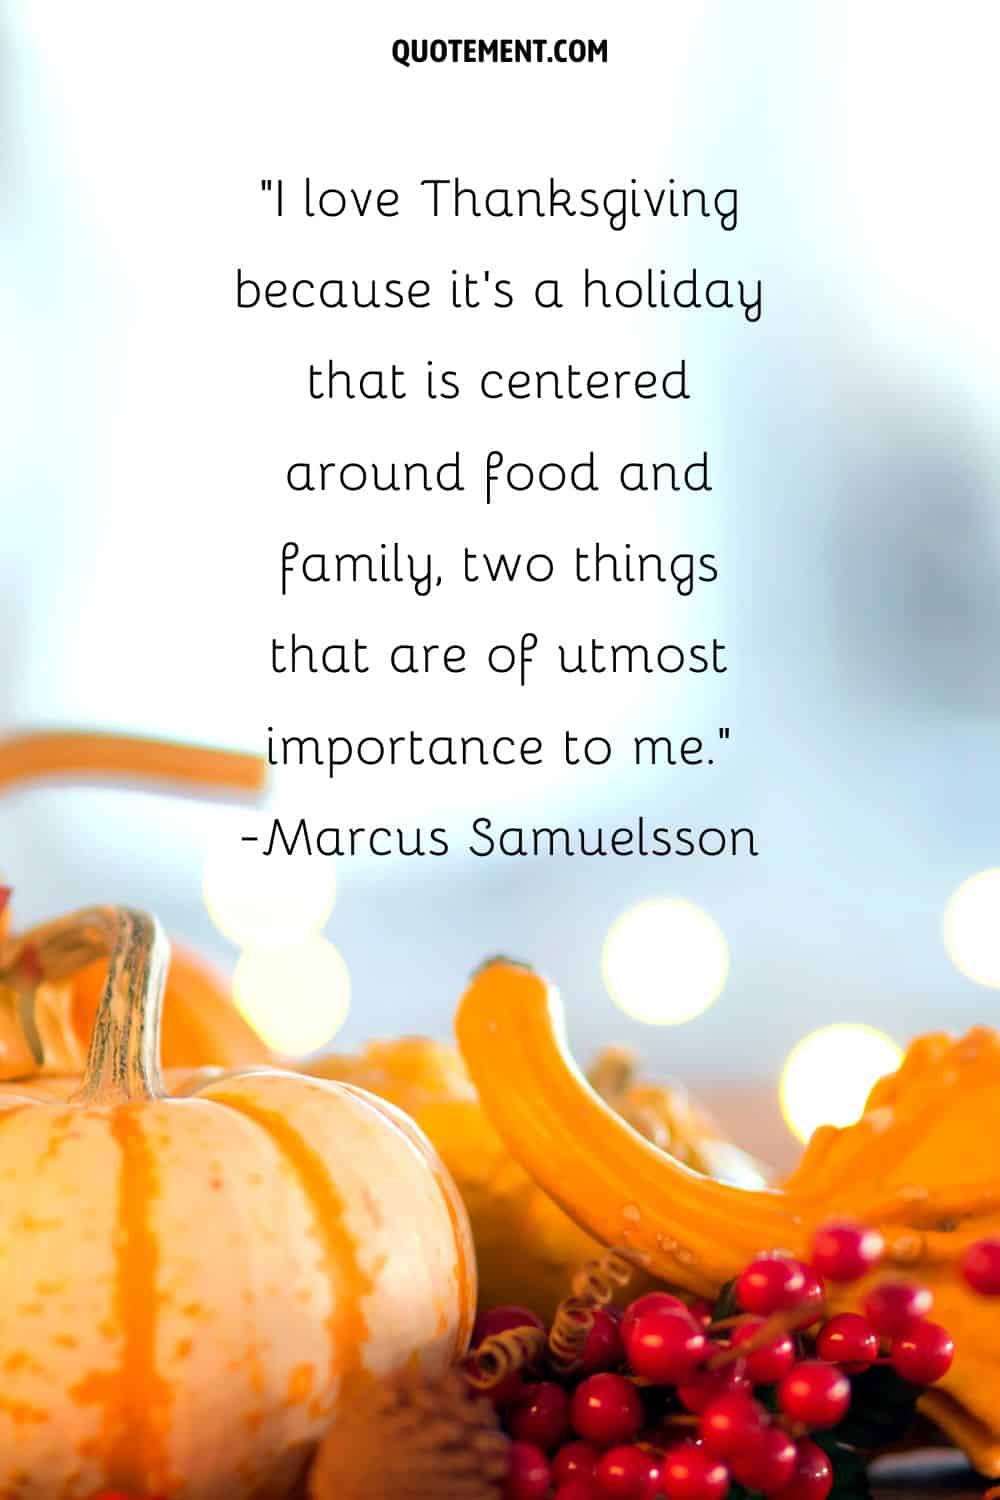 delightful scene with pumpkins and cranberries representing Thanksgiving family quote